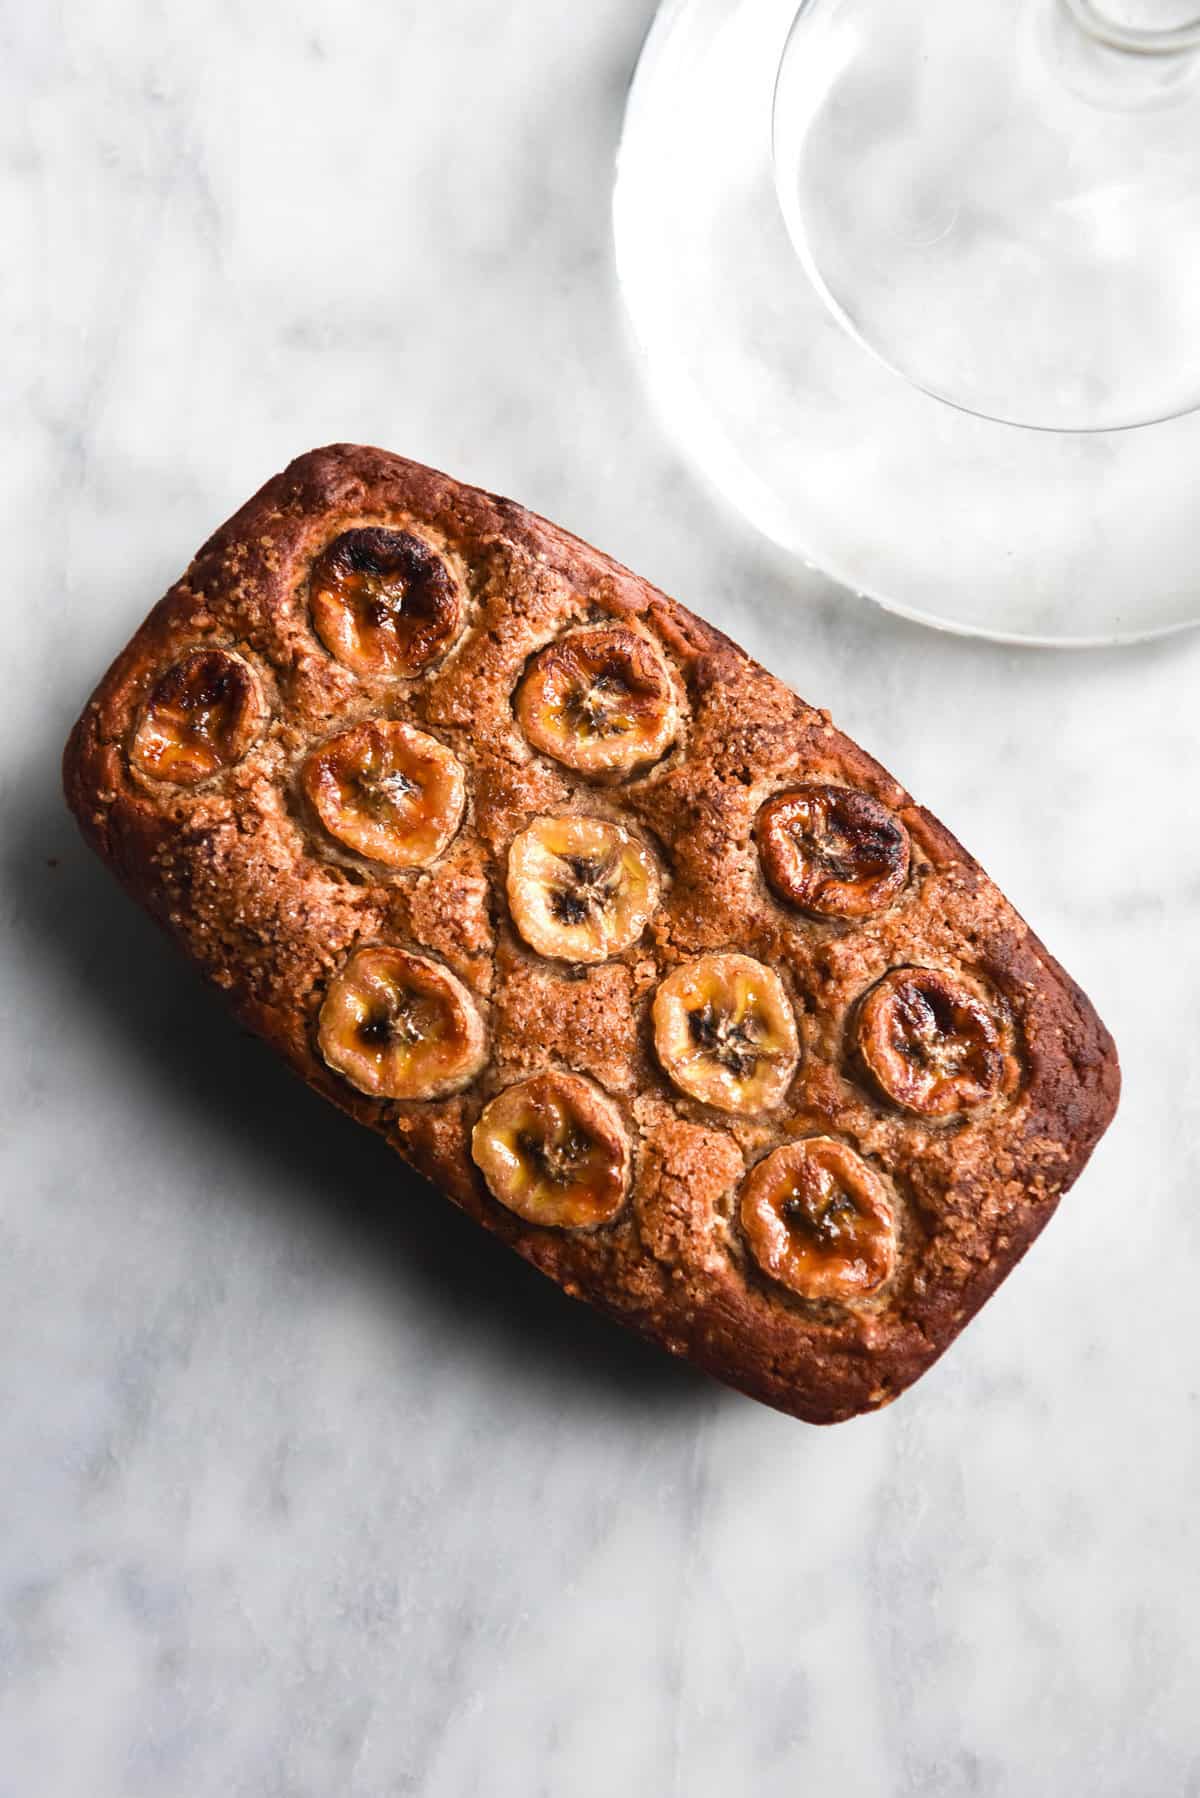 An aerial view of a loaf of gluten free banana bread atop a white marble table. The loaf is golden brown and topped with banana coins. A glass of water sits to the top right of the image, casting a light across the marble table.